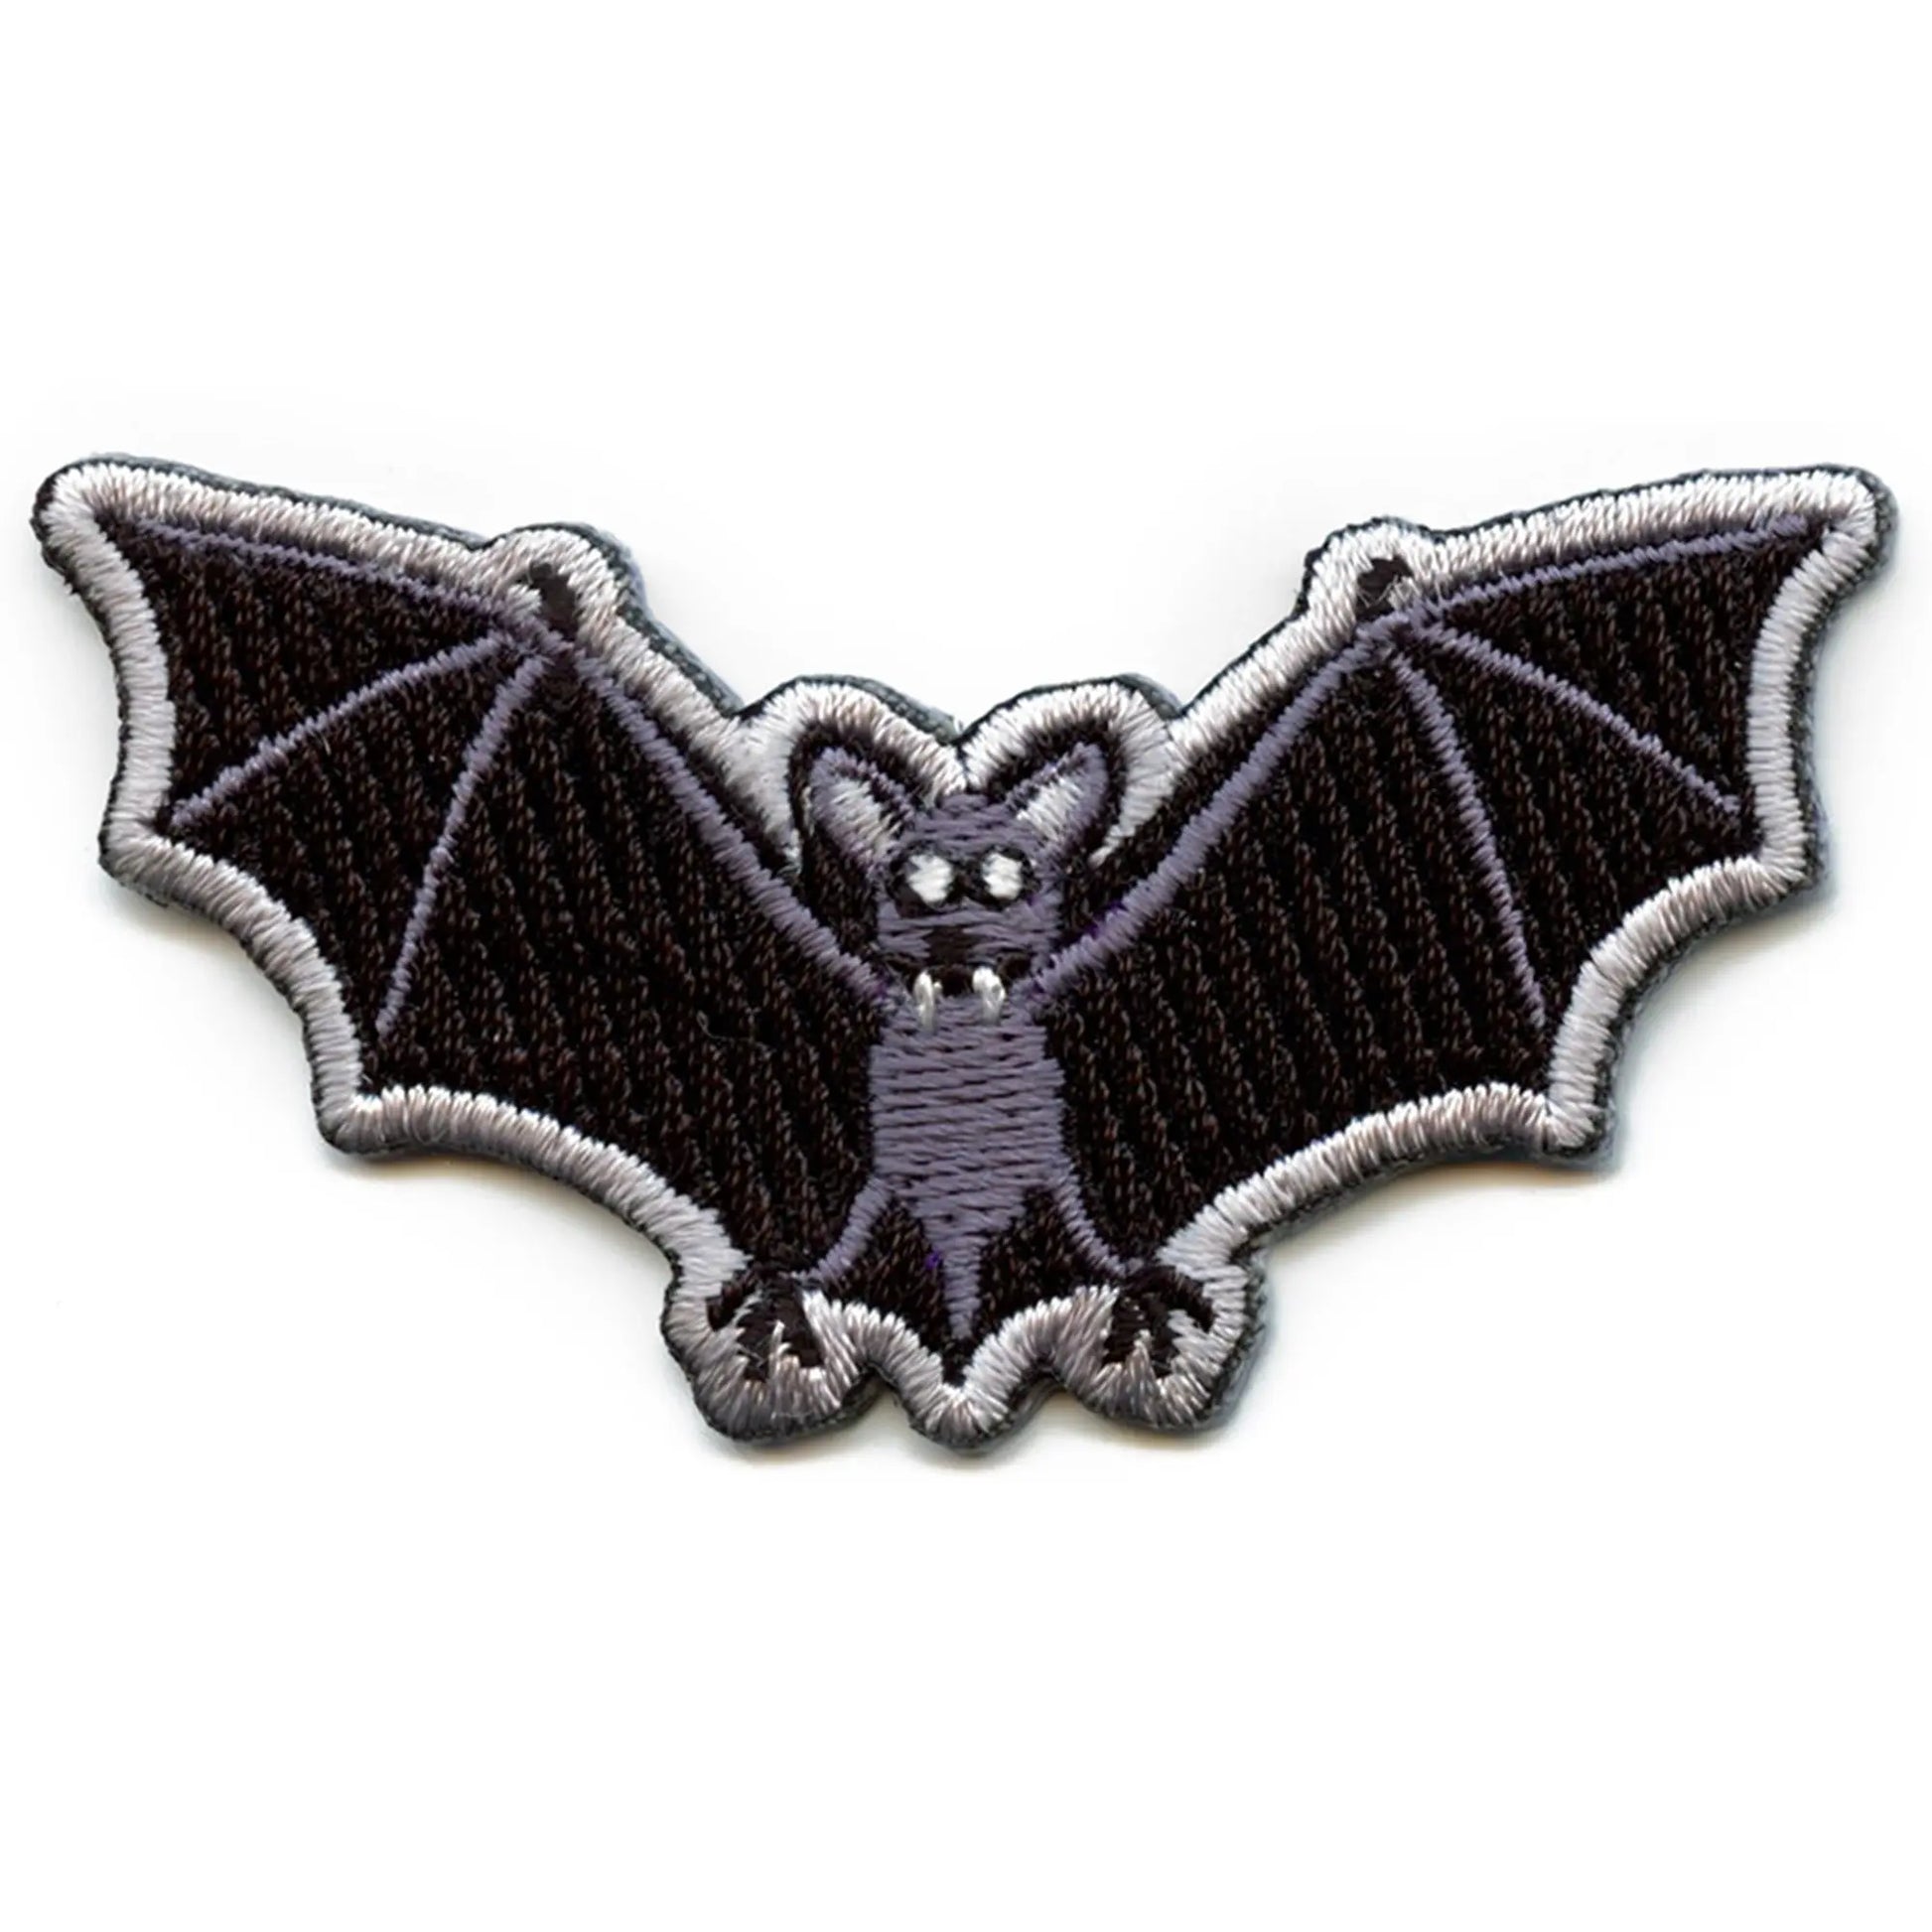 Small Flying Bat Patch Embroidered Iron On 